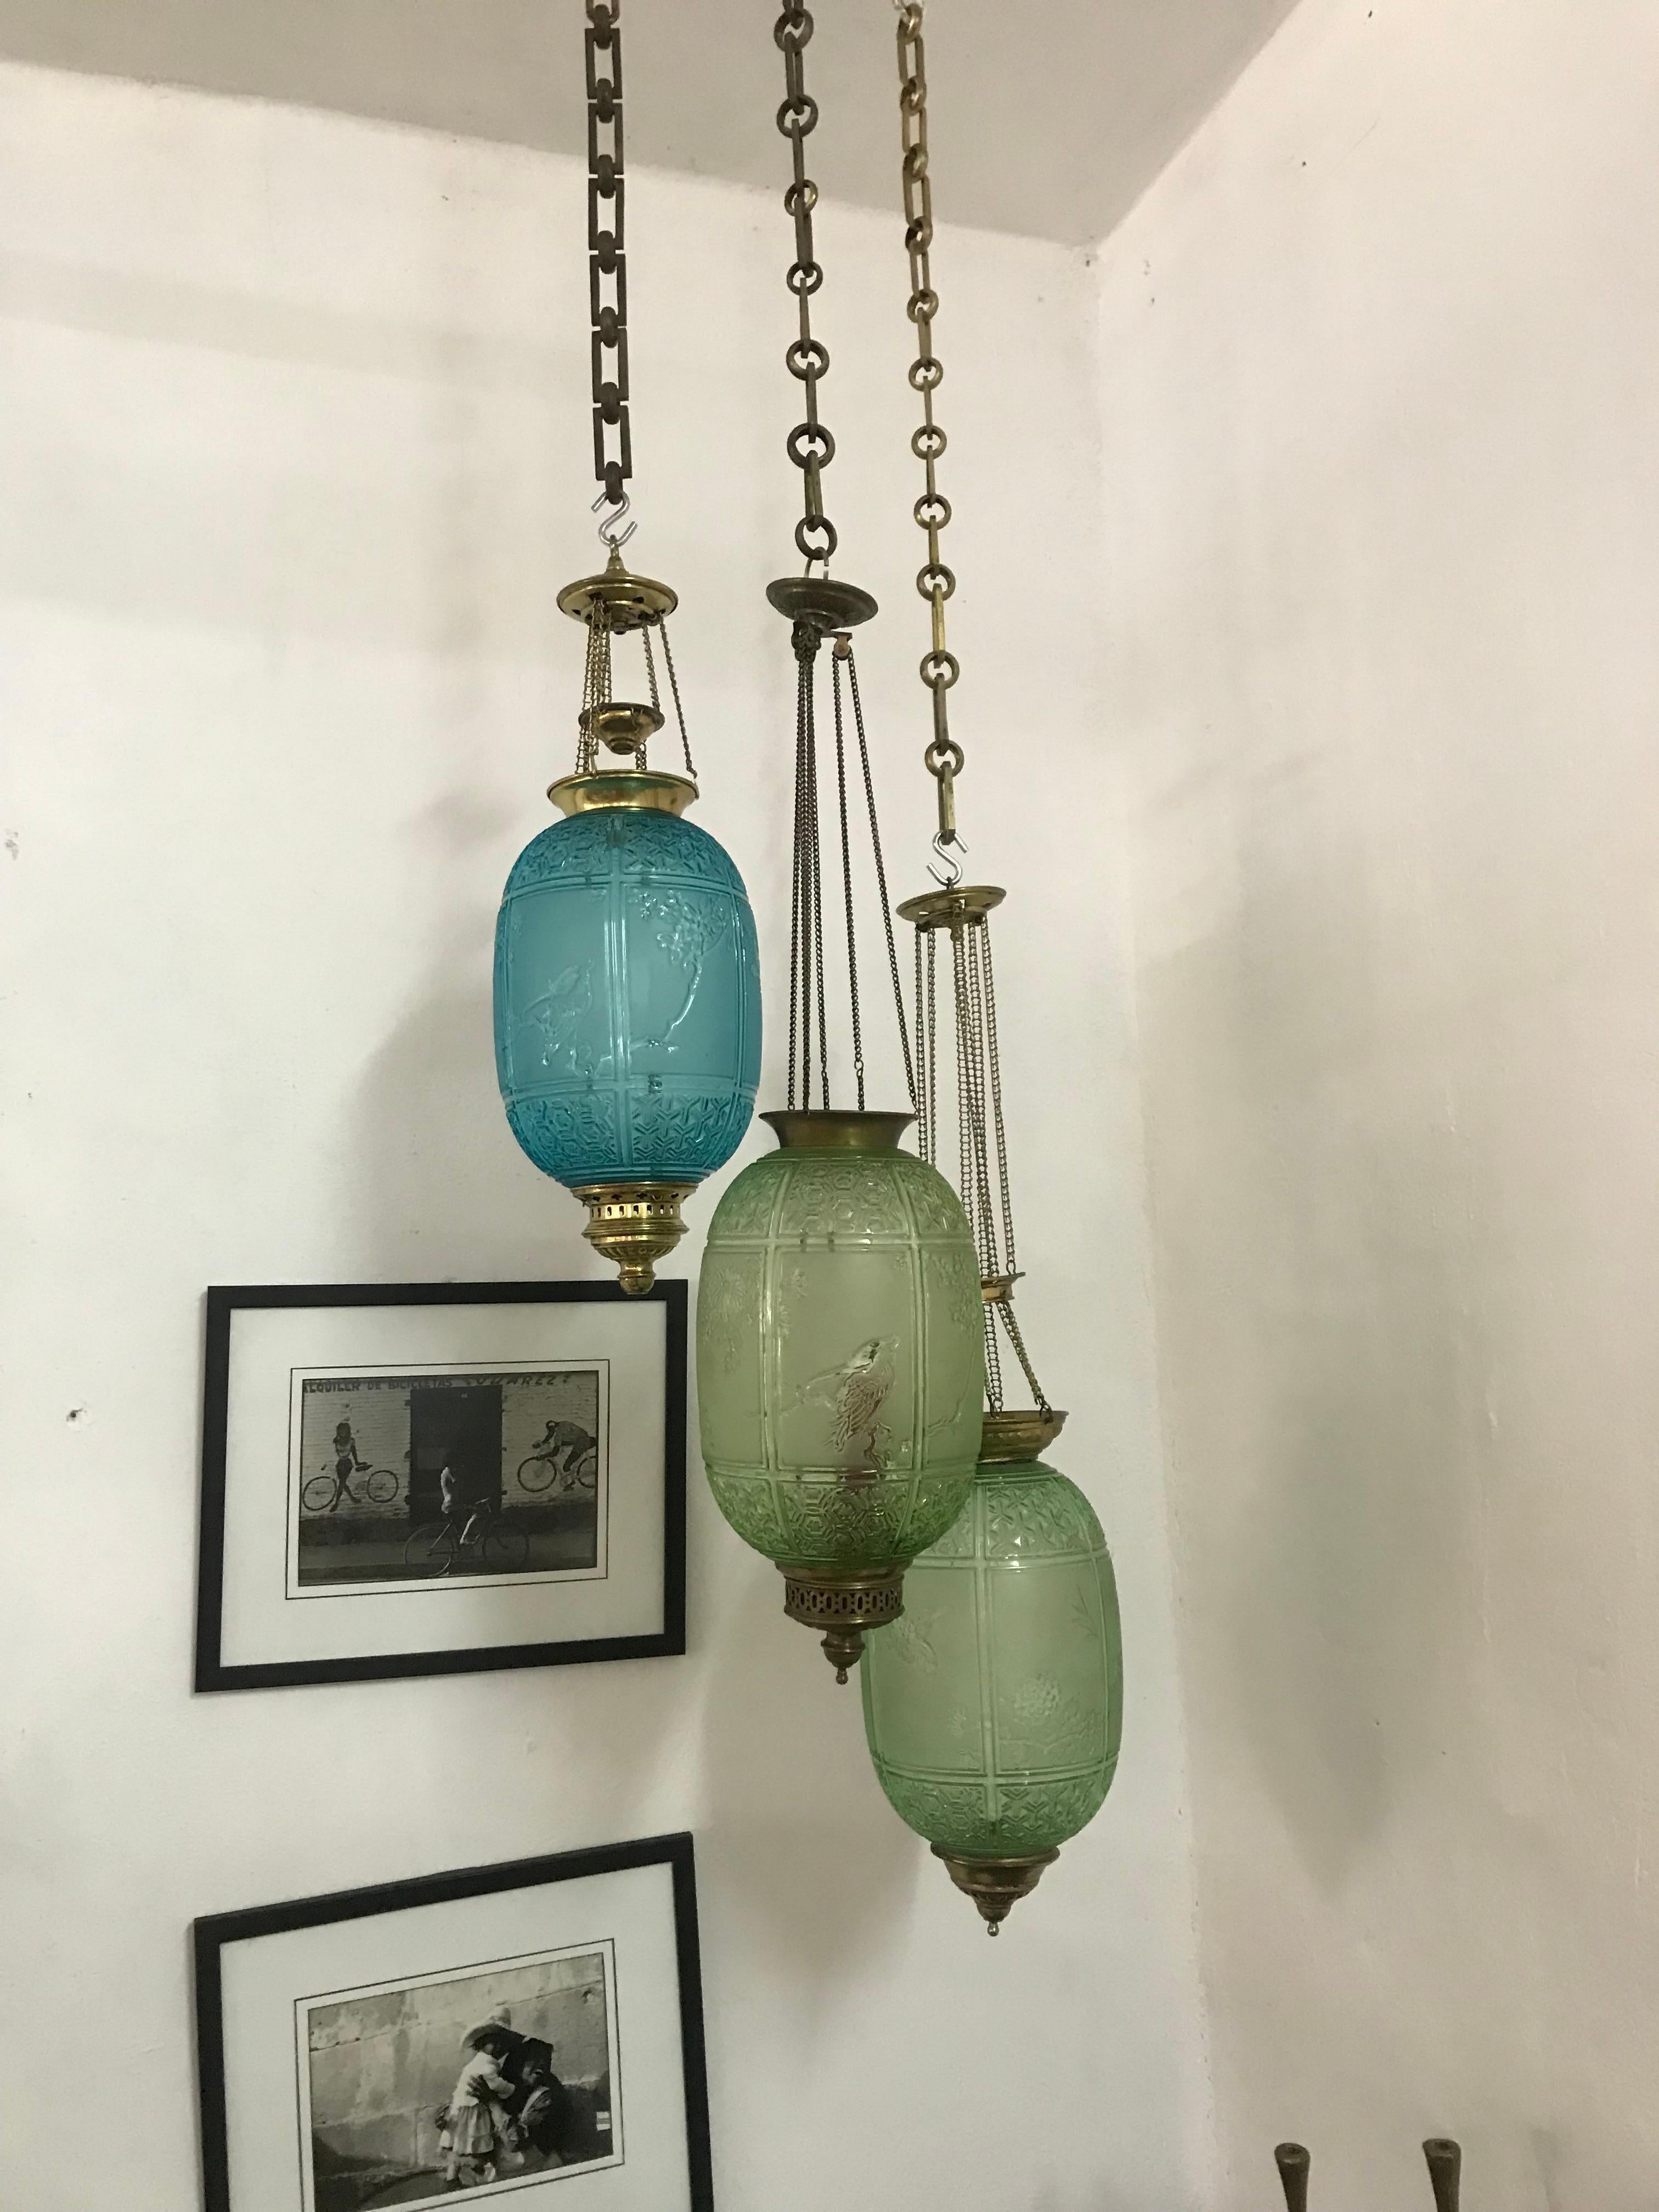 Late 19th Century Art Nouveau Candle Lanterns by Baccarat France, Depicting Birds 